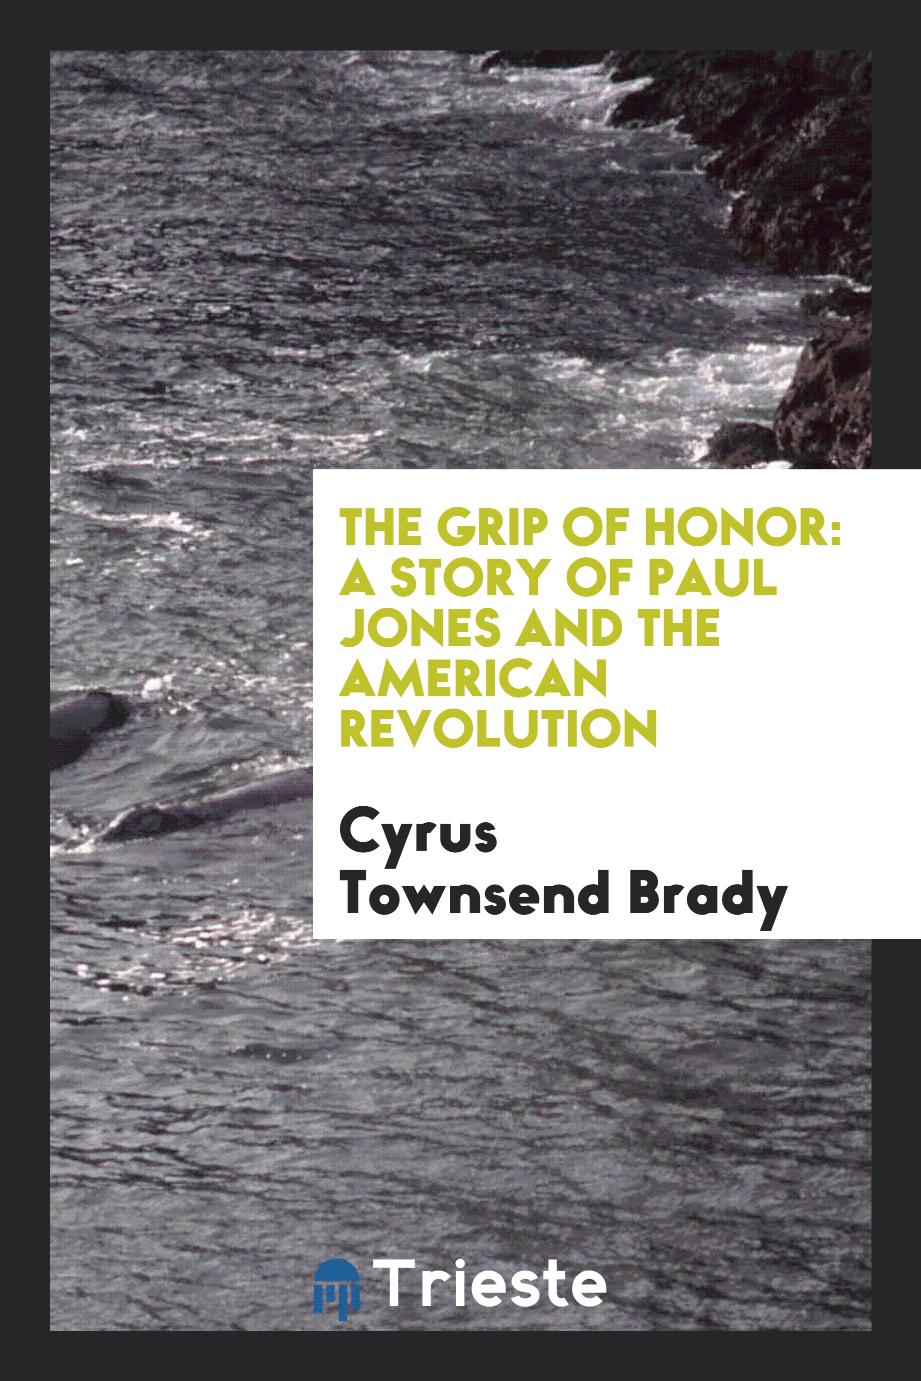 The grip of honor: a story of Paul Jones and the American Revolution